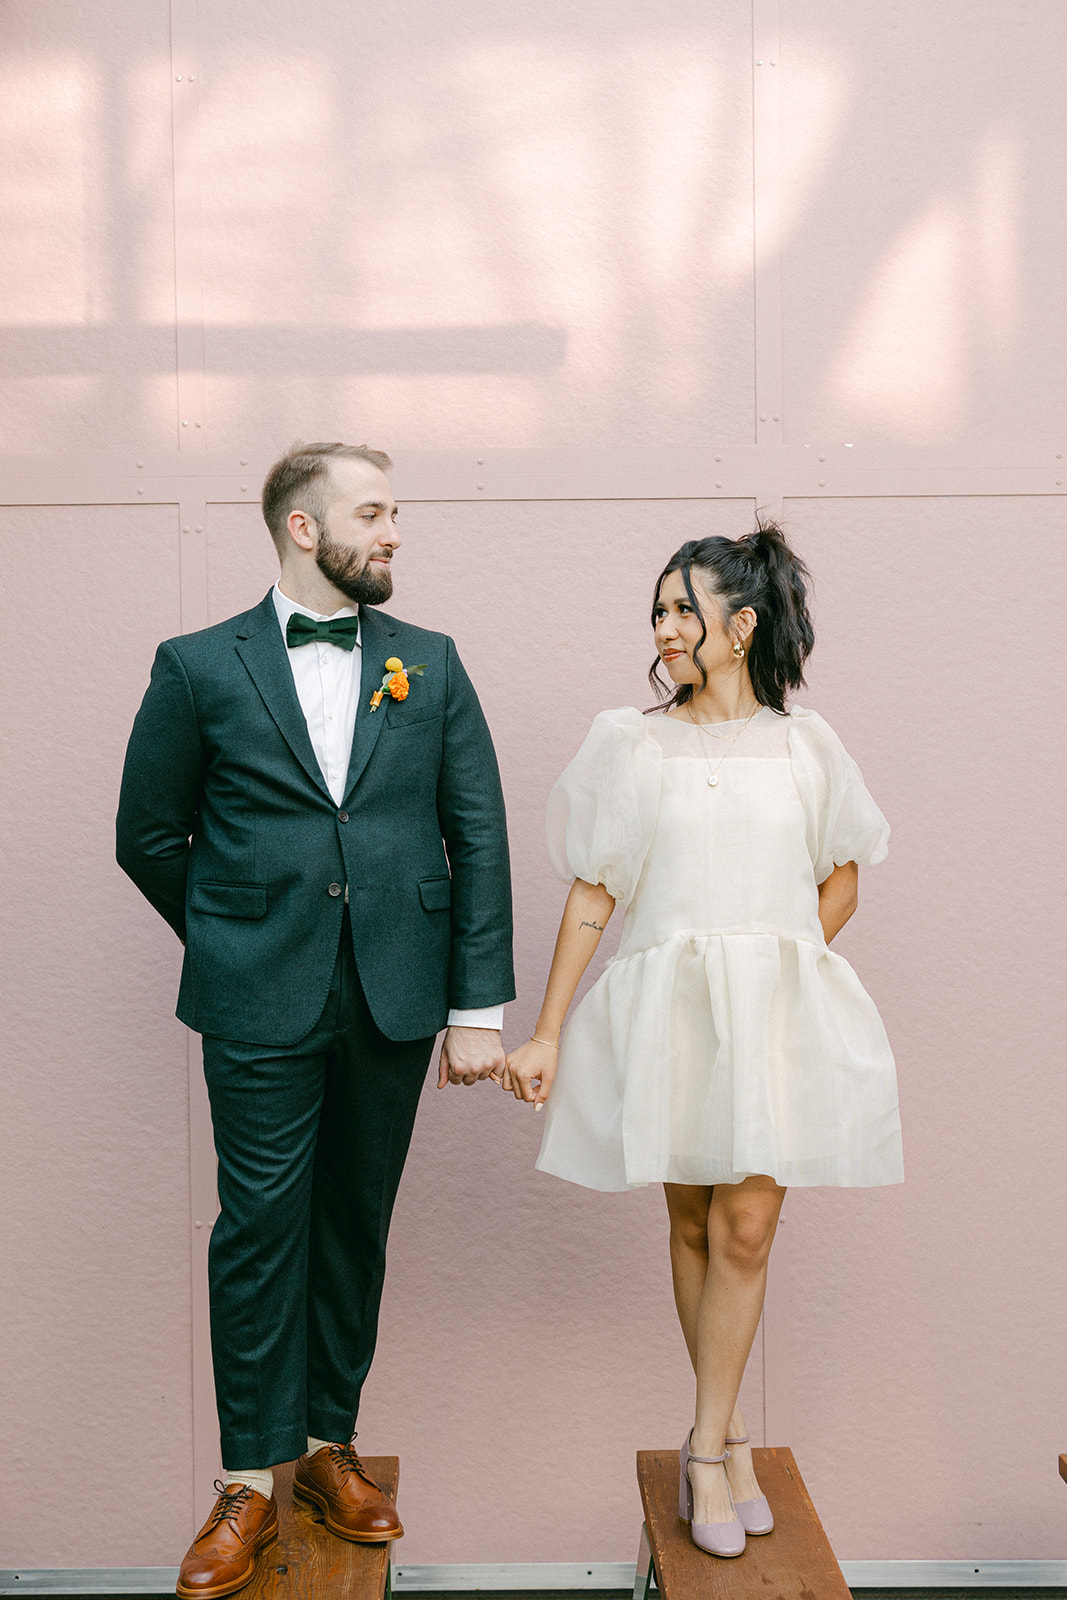 Here’s what an LA wedding with a $50K budget looks like